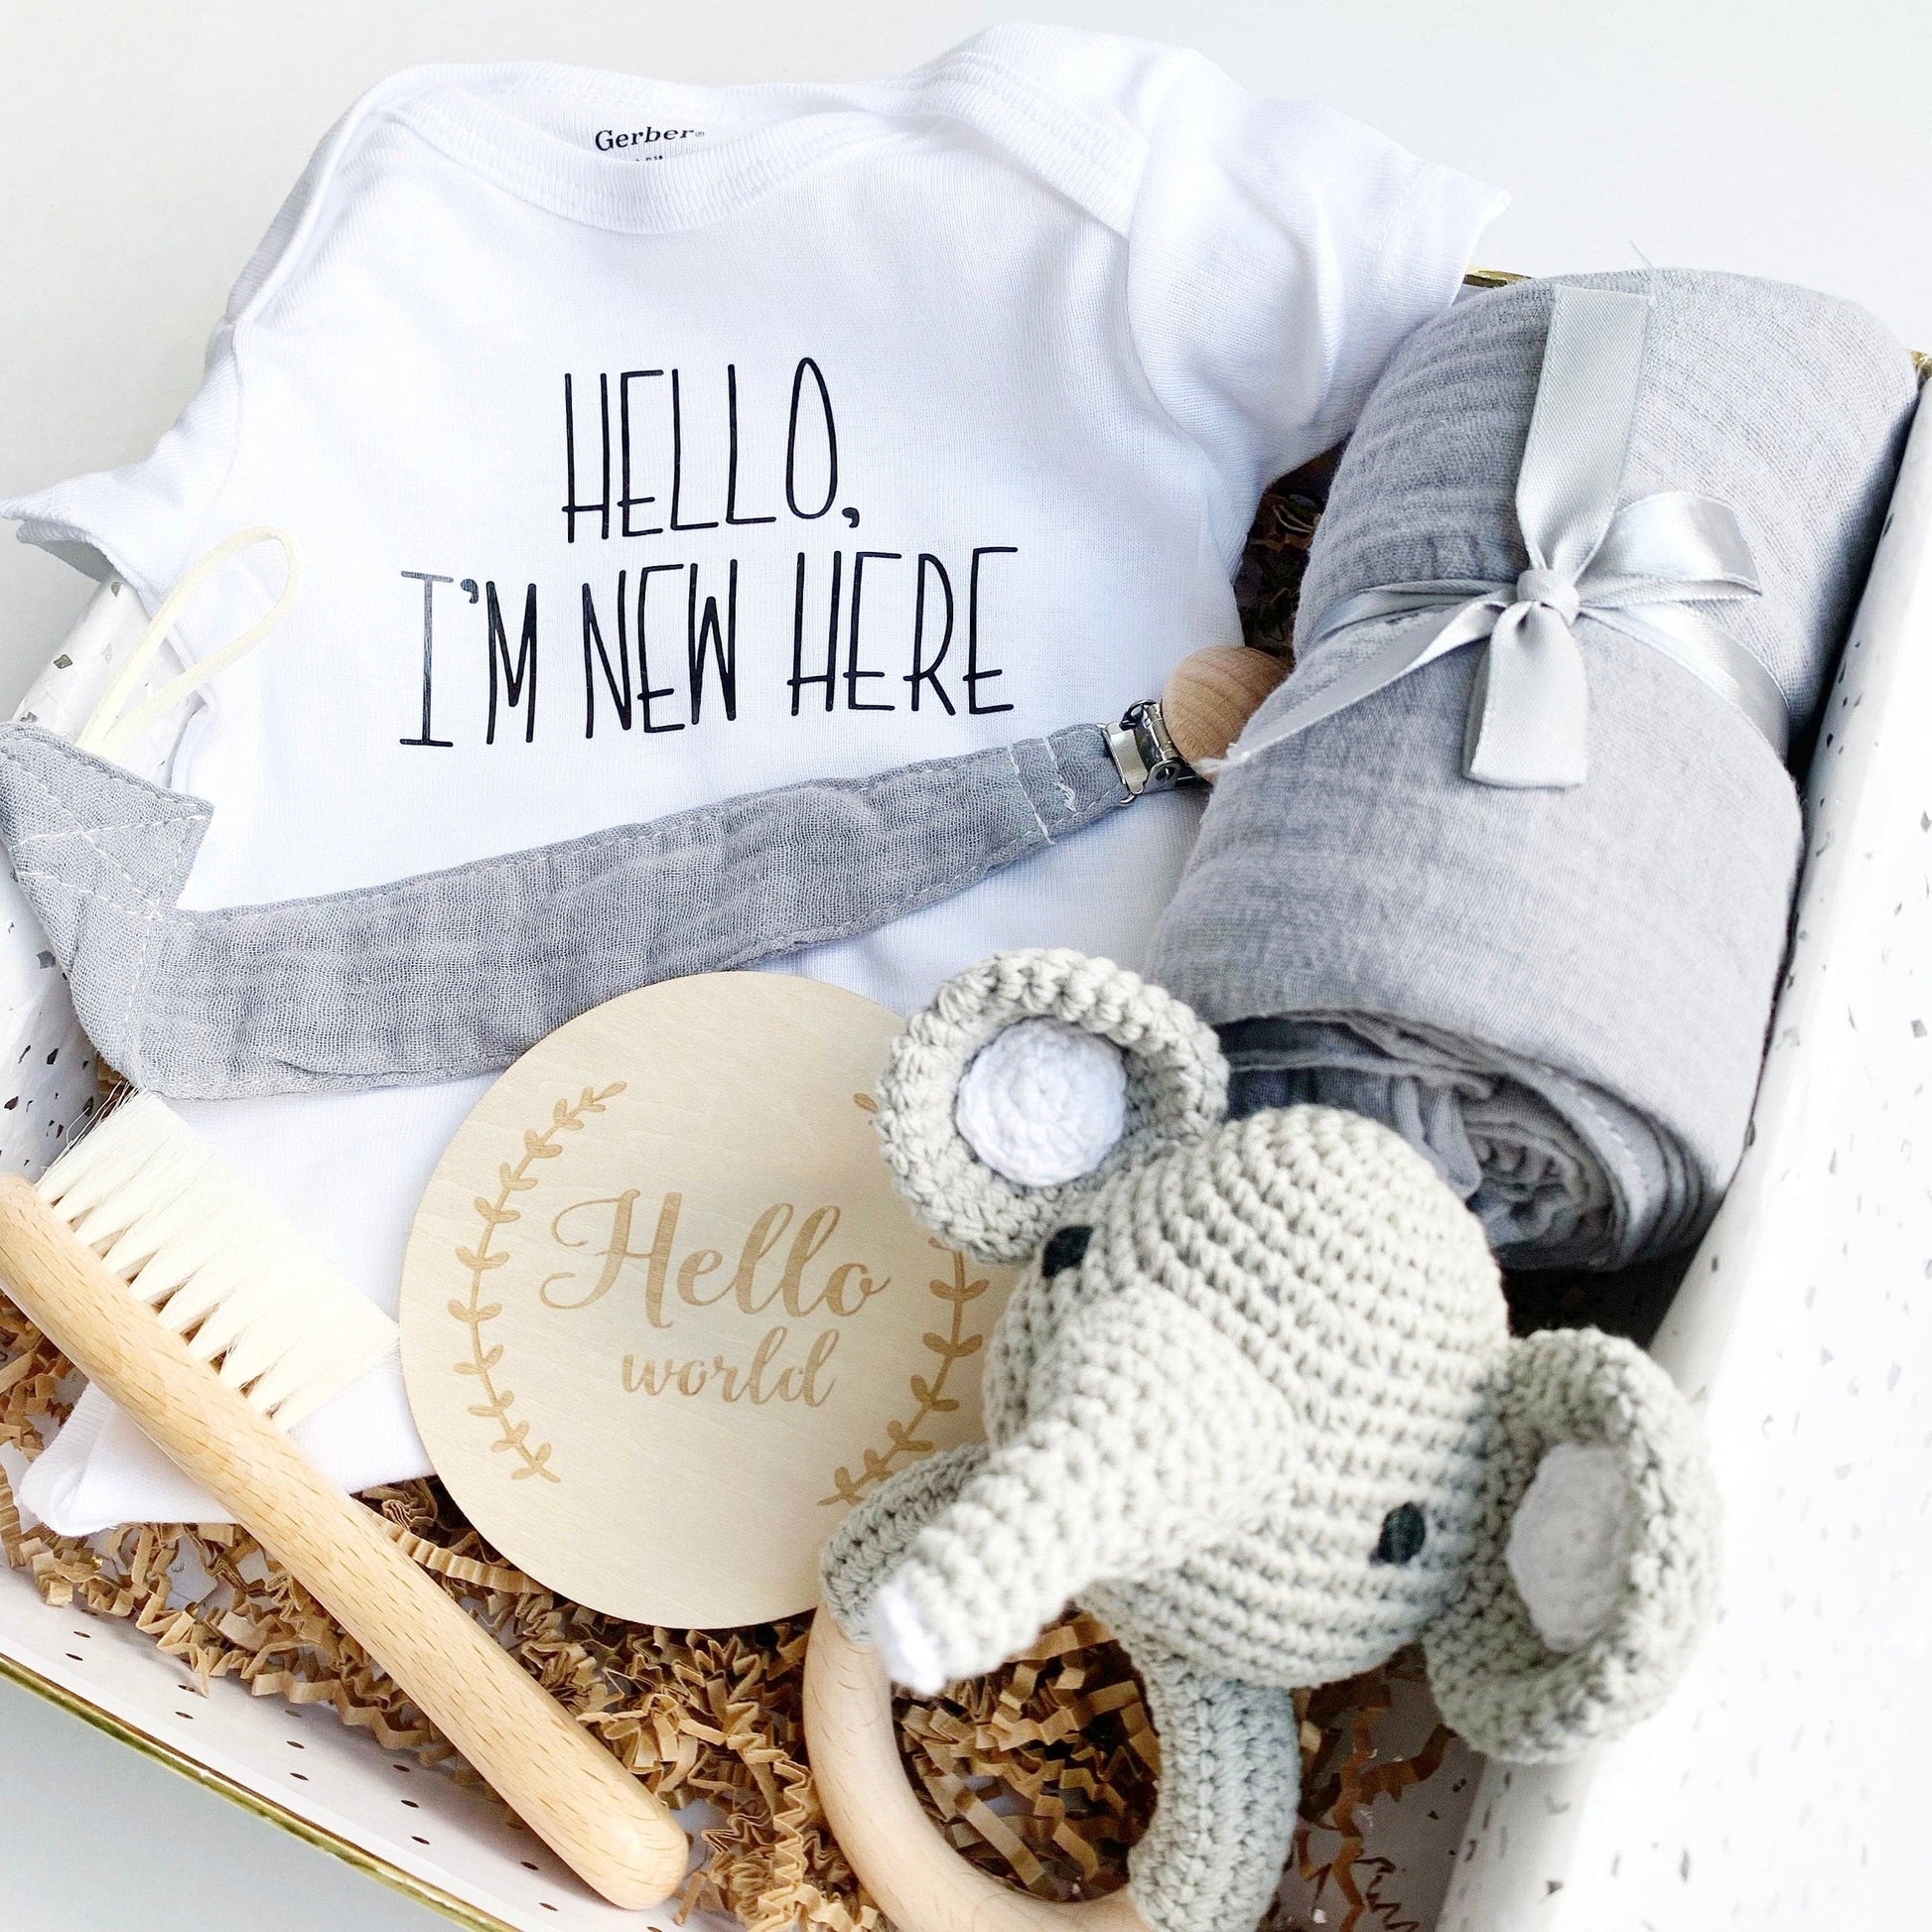 The Best Baby Shower Gifts for Moms